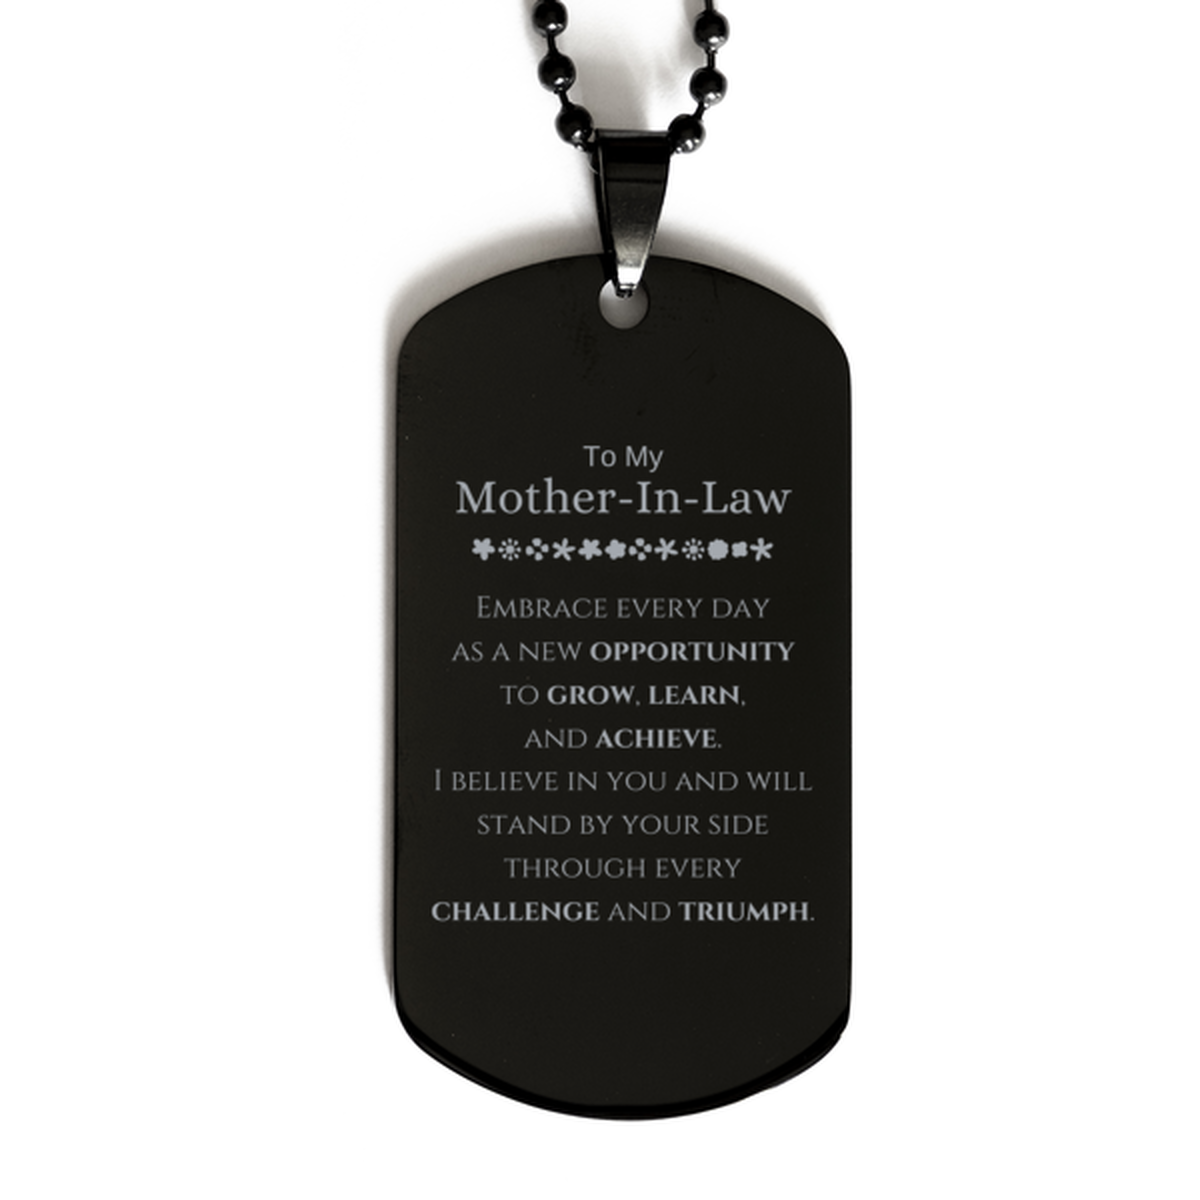 To My Mother-In-Law Gifts, I believe in you and will stand by your side, Inspirational Black Dog Tag For Mother-In-Law, Birthday Christmas Motivational Mother-In-Law Gifts